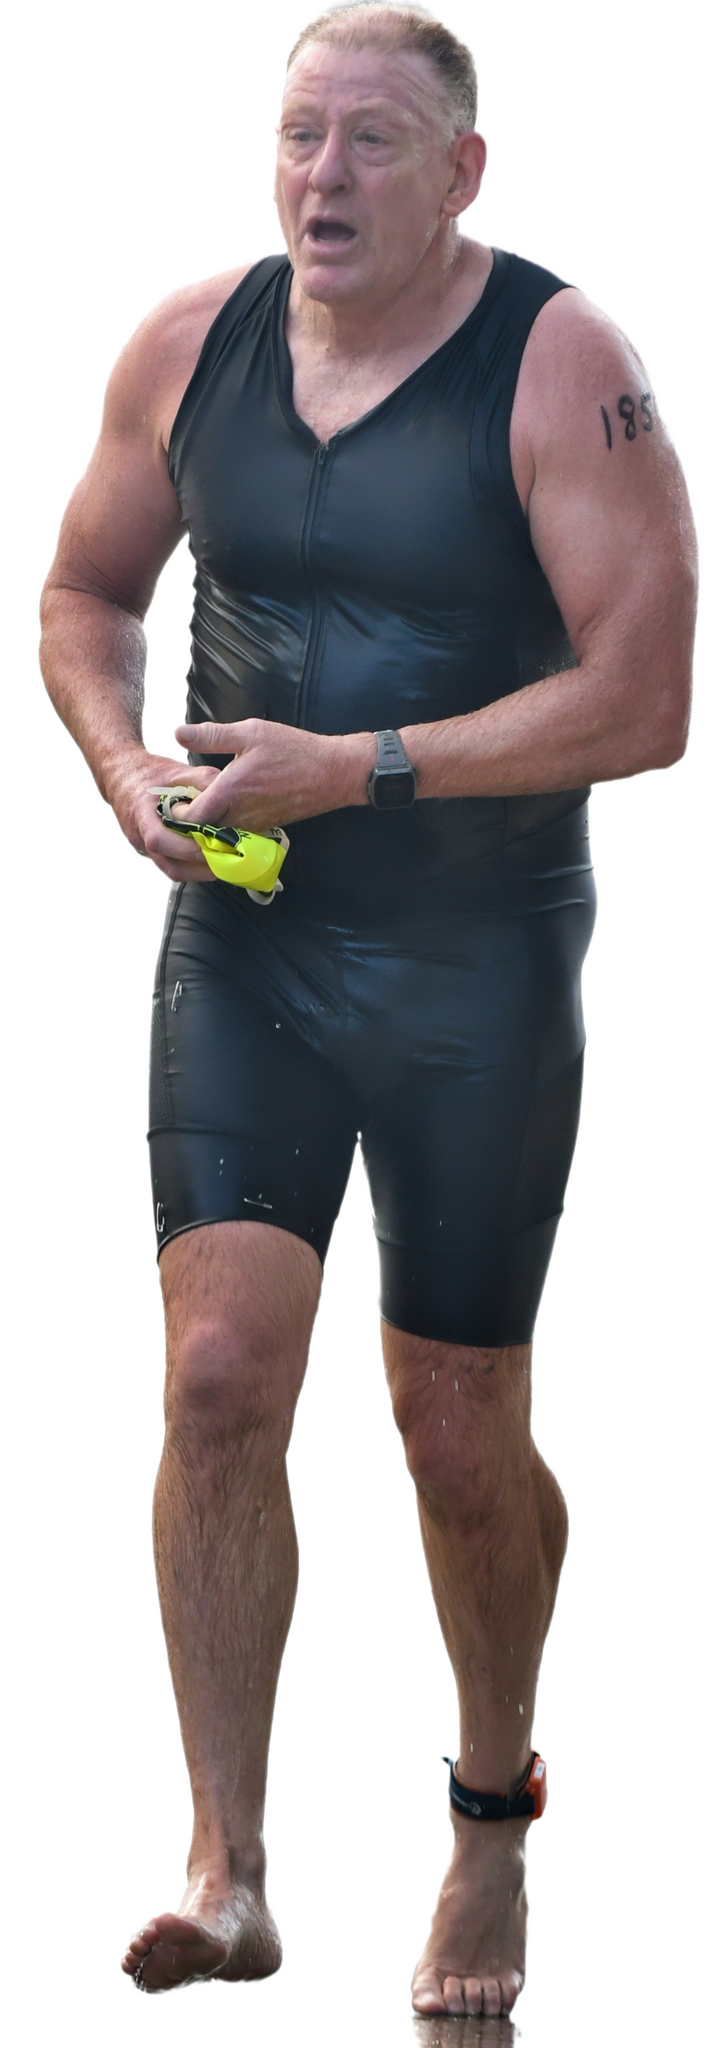 The Eco-cool tri suit from Herron is comfortable and high performance.